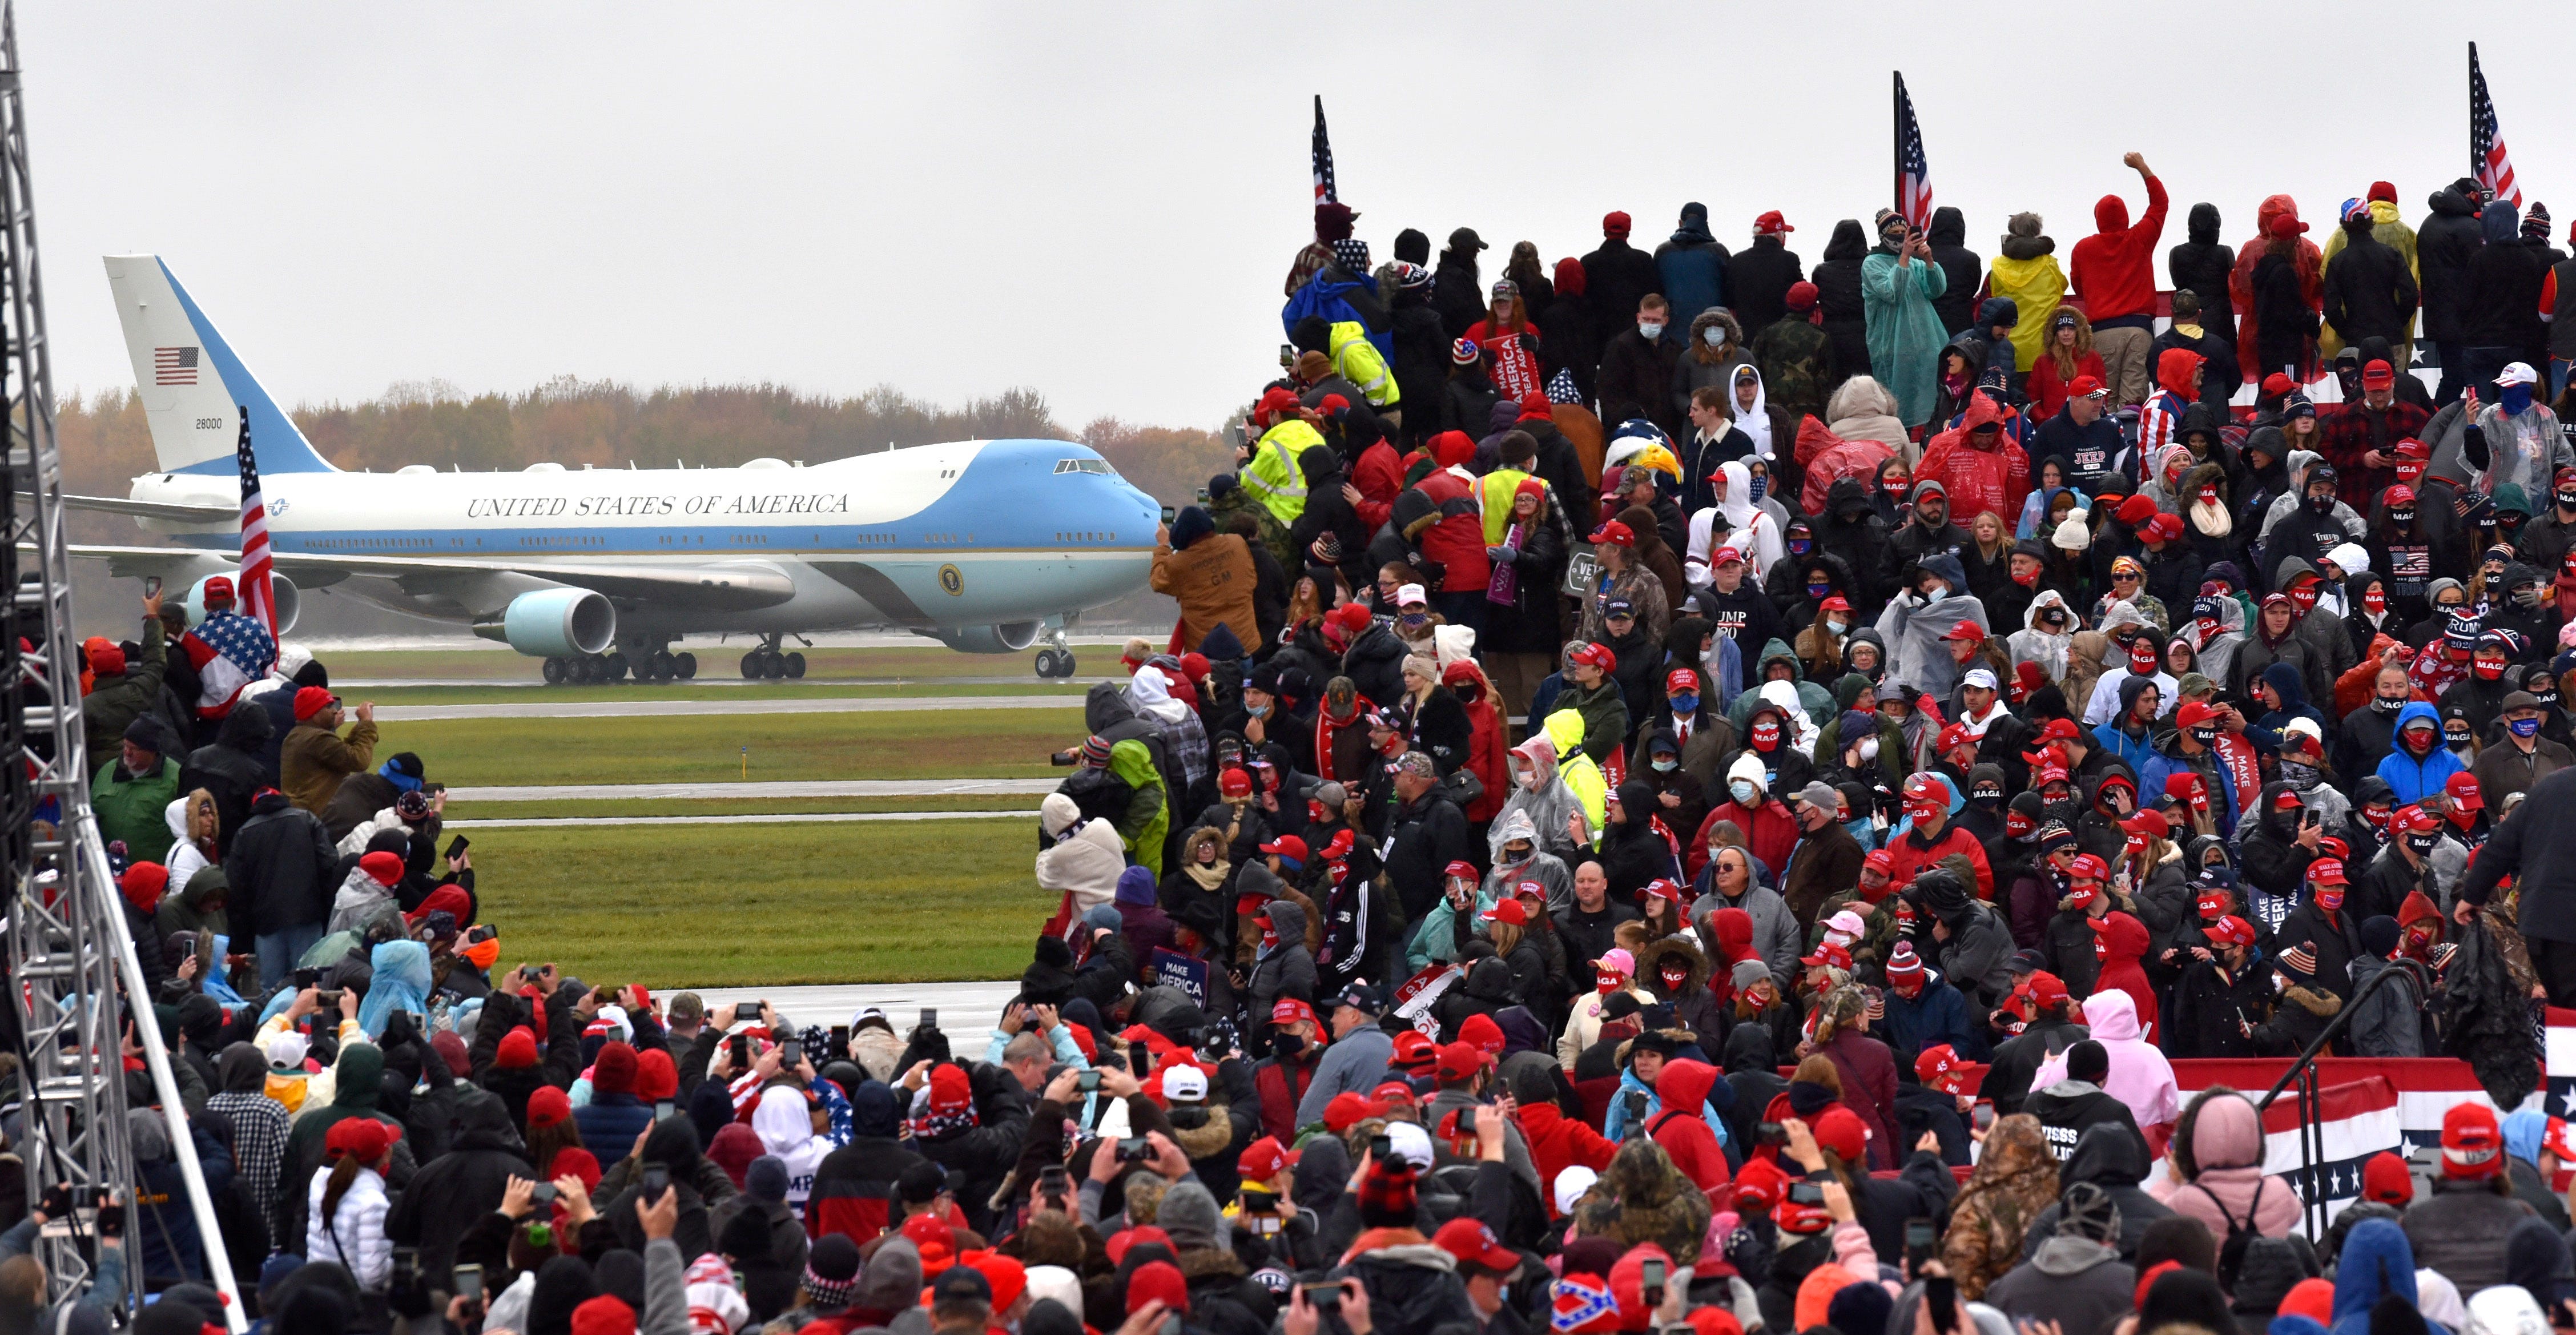 Air Force One arrives with the President for a Make America Great Again rally at the Capital Region International Airport in Lansing, Tuesday.